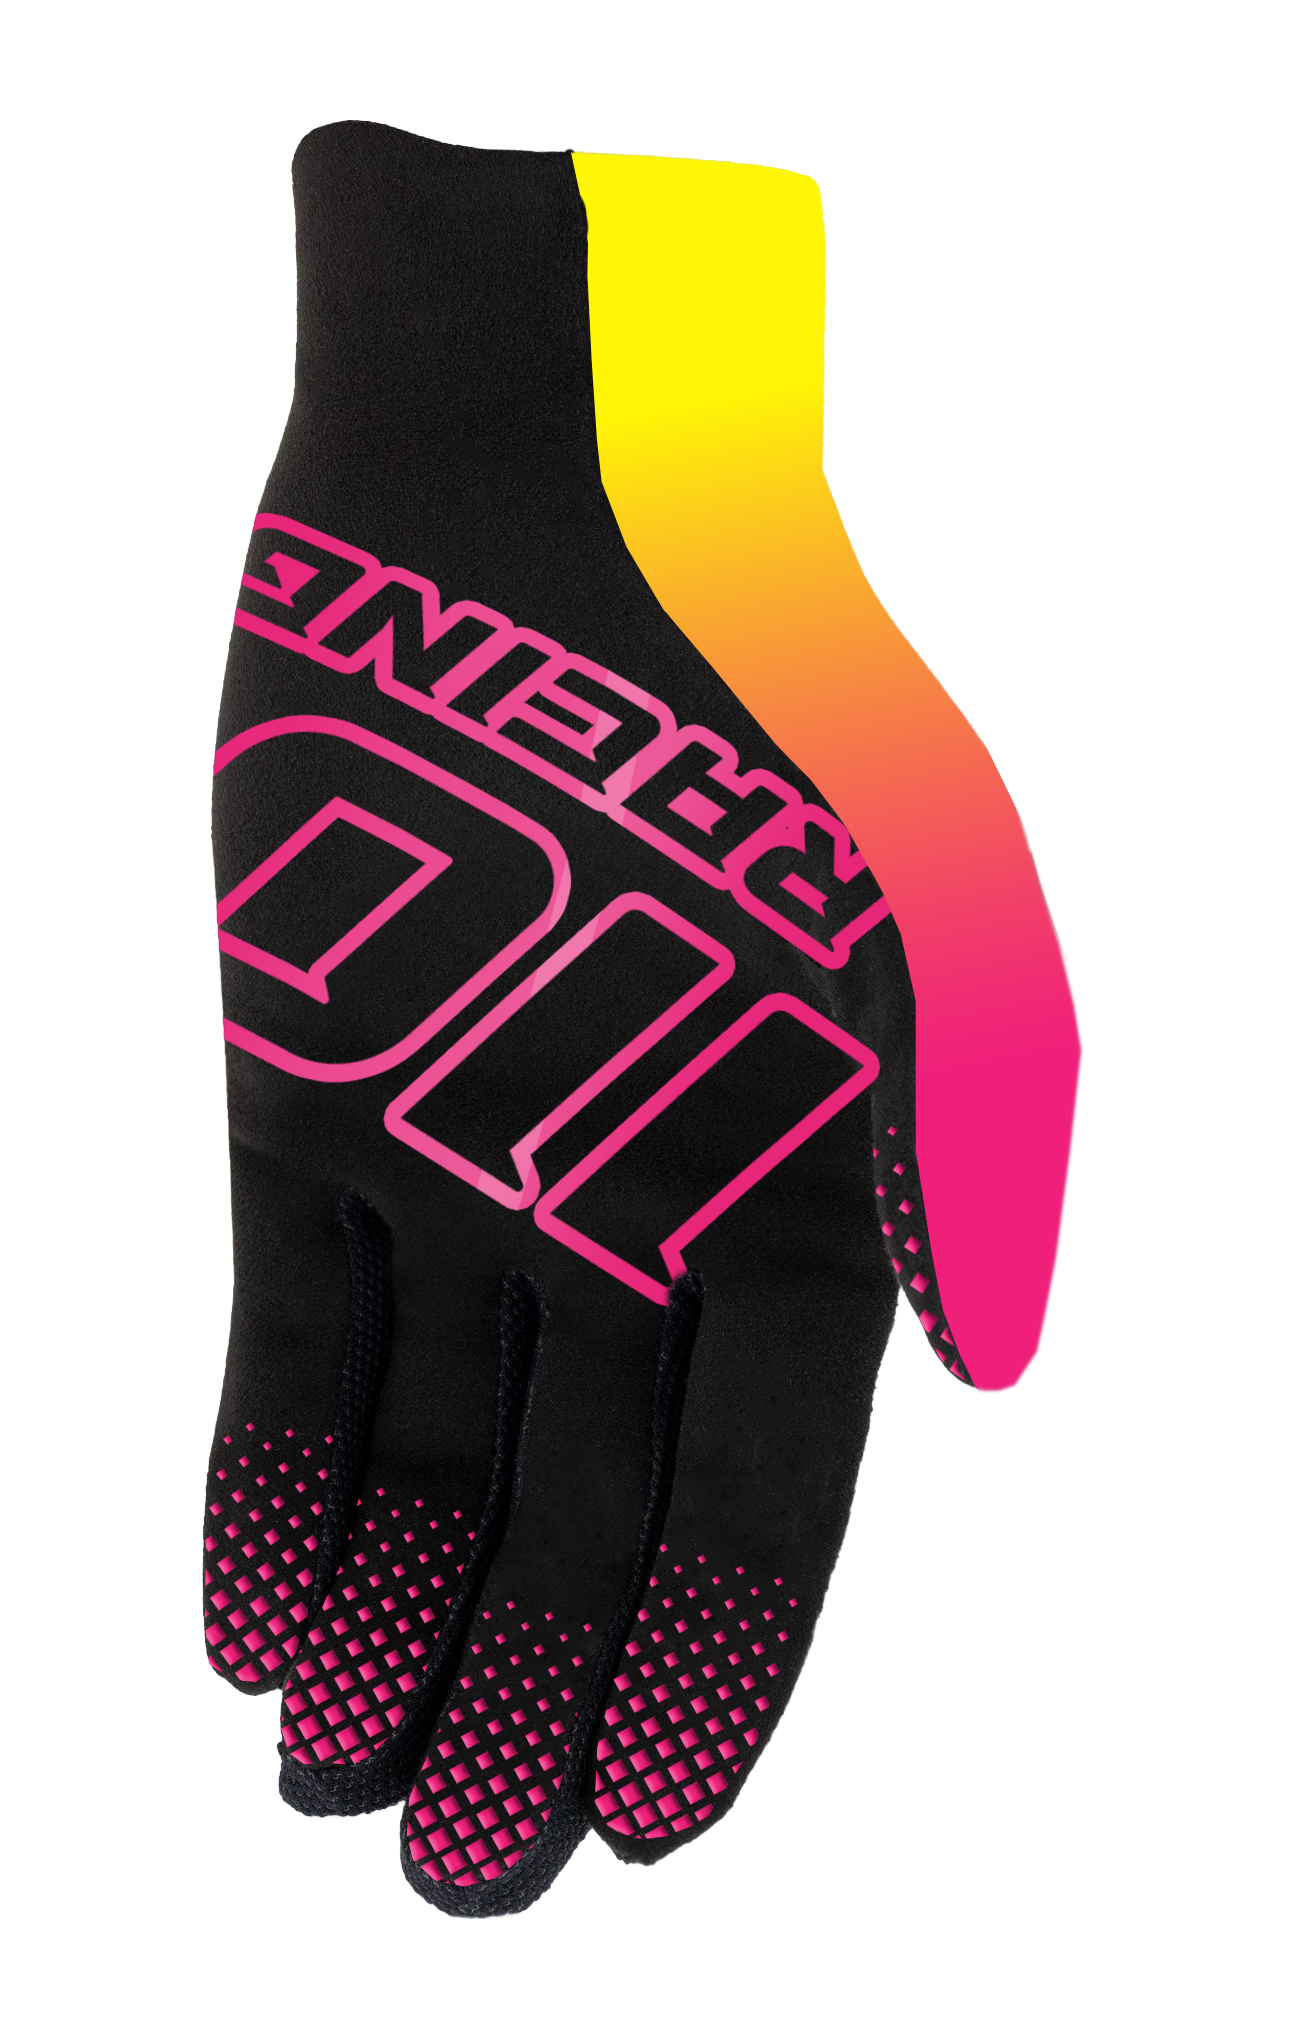 110 RACING // LE23 ICONIC YOUTH GLOVE - PINK